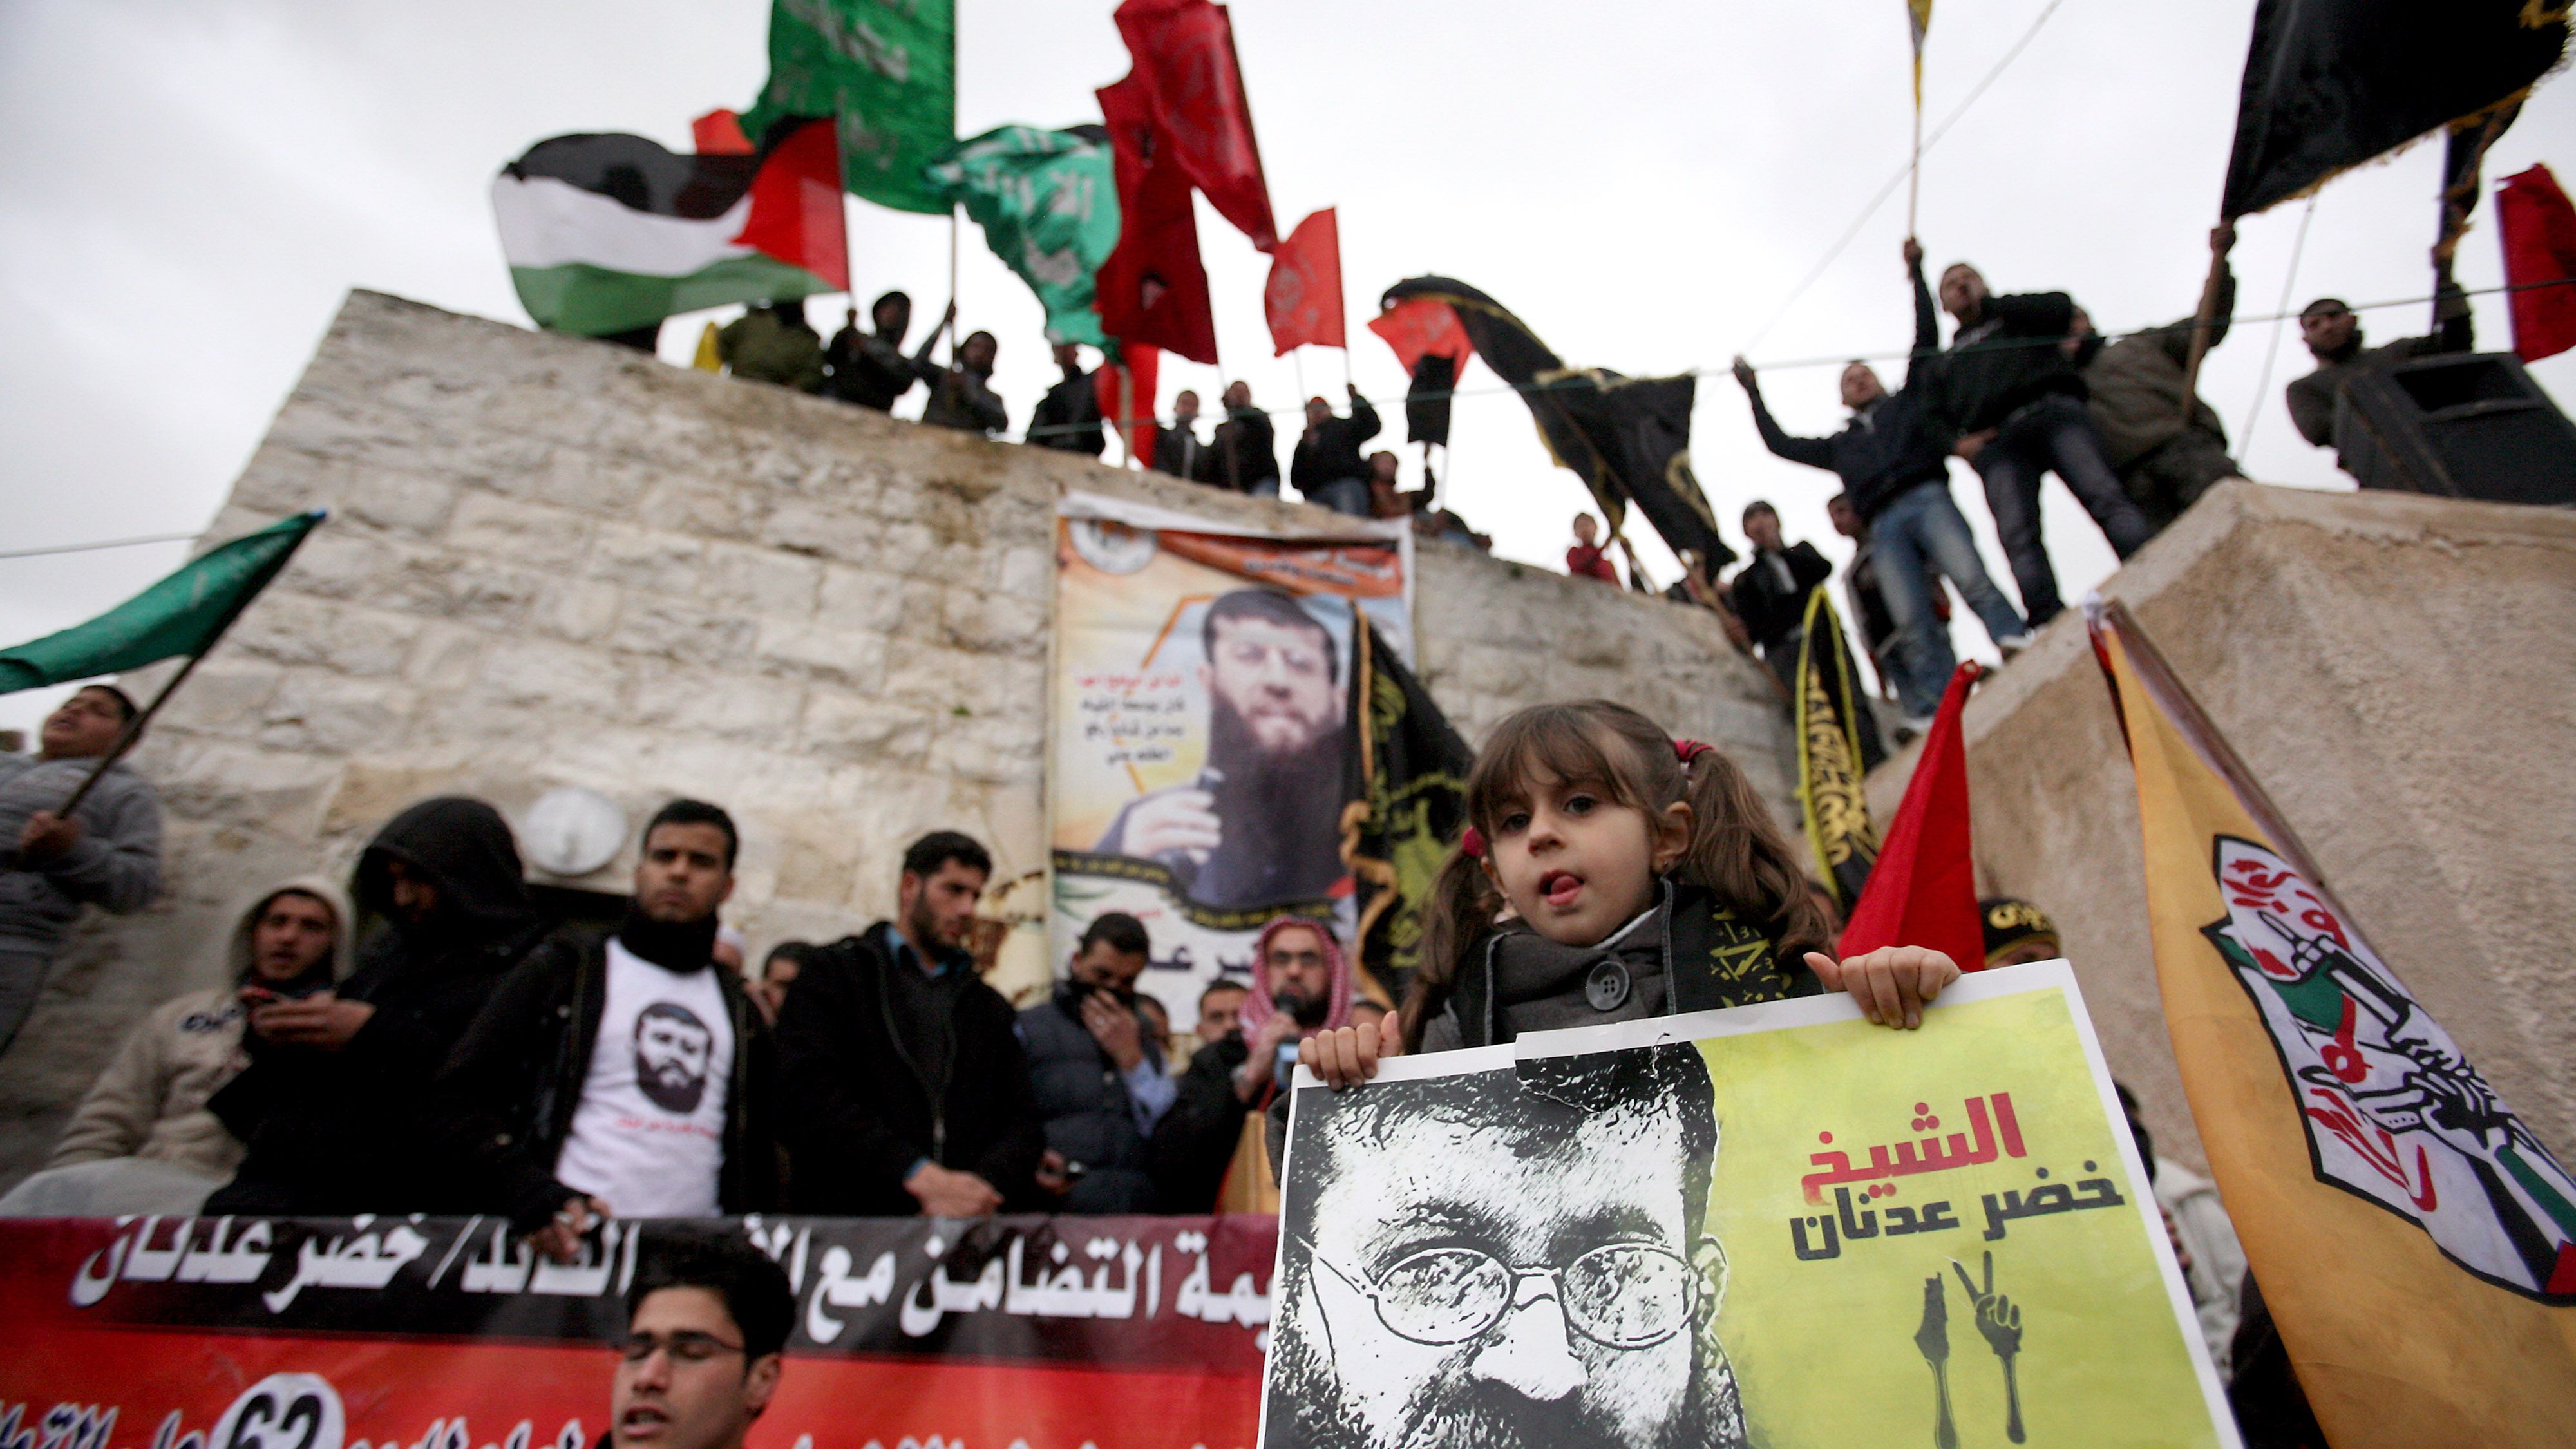 Palestinian prisoner Khader Adnan's daughter Maali takes part in a protest in support of her father, who is on hunger strike.